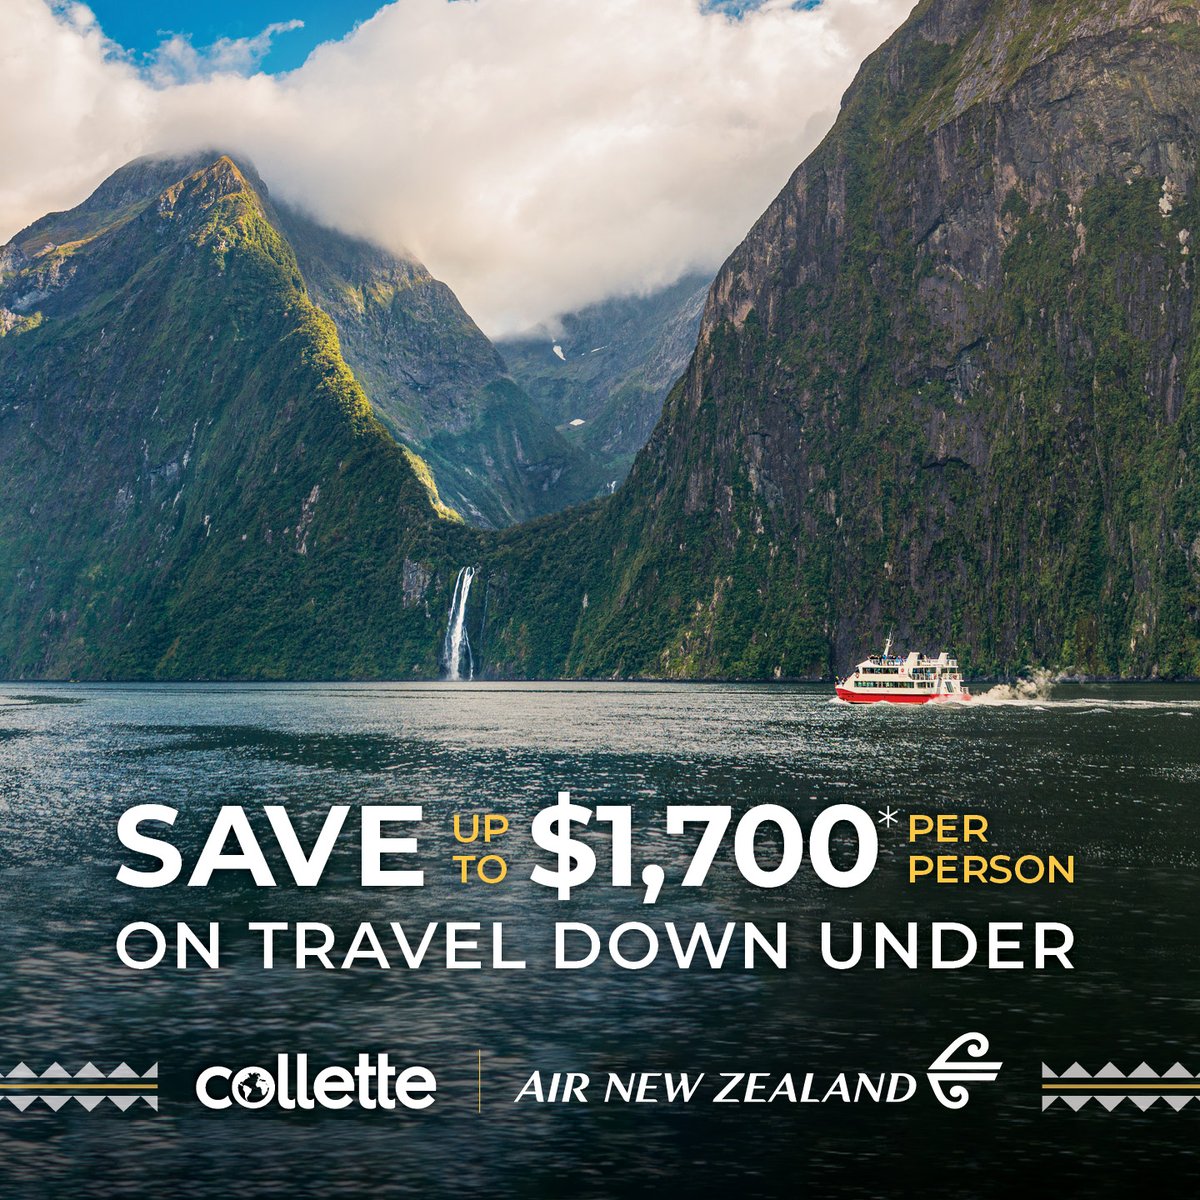 Last chance! You still have time to save up to $1700* per person with Air New Zealand when you book one of our small group Explorations adventures Down Under. bit.ly/3W2aWAI *Restrictions apply.